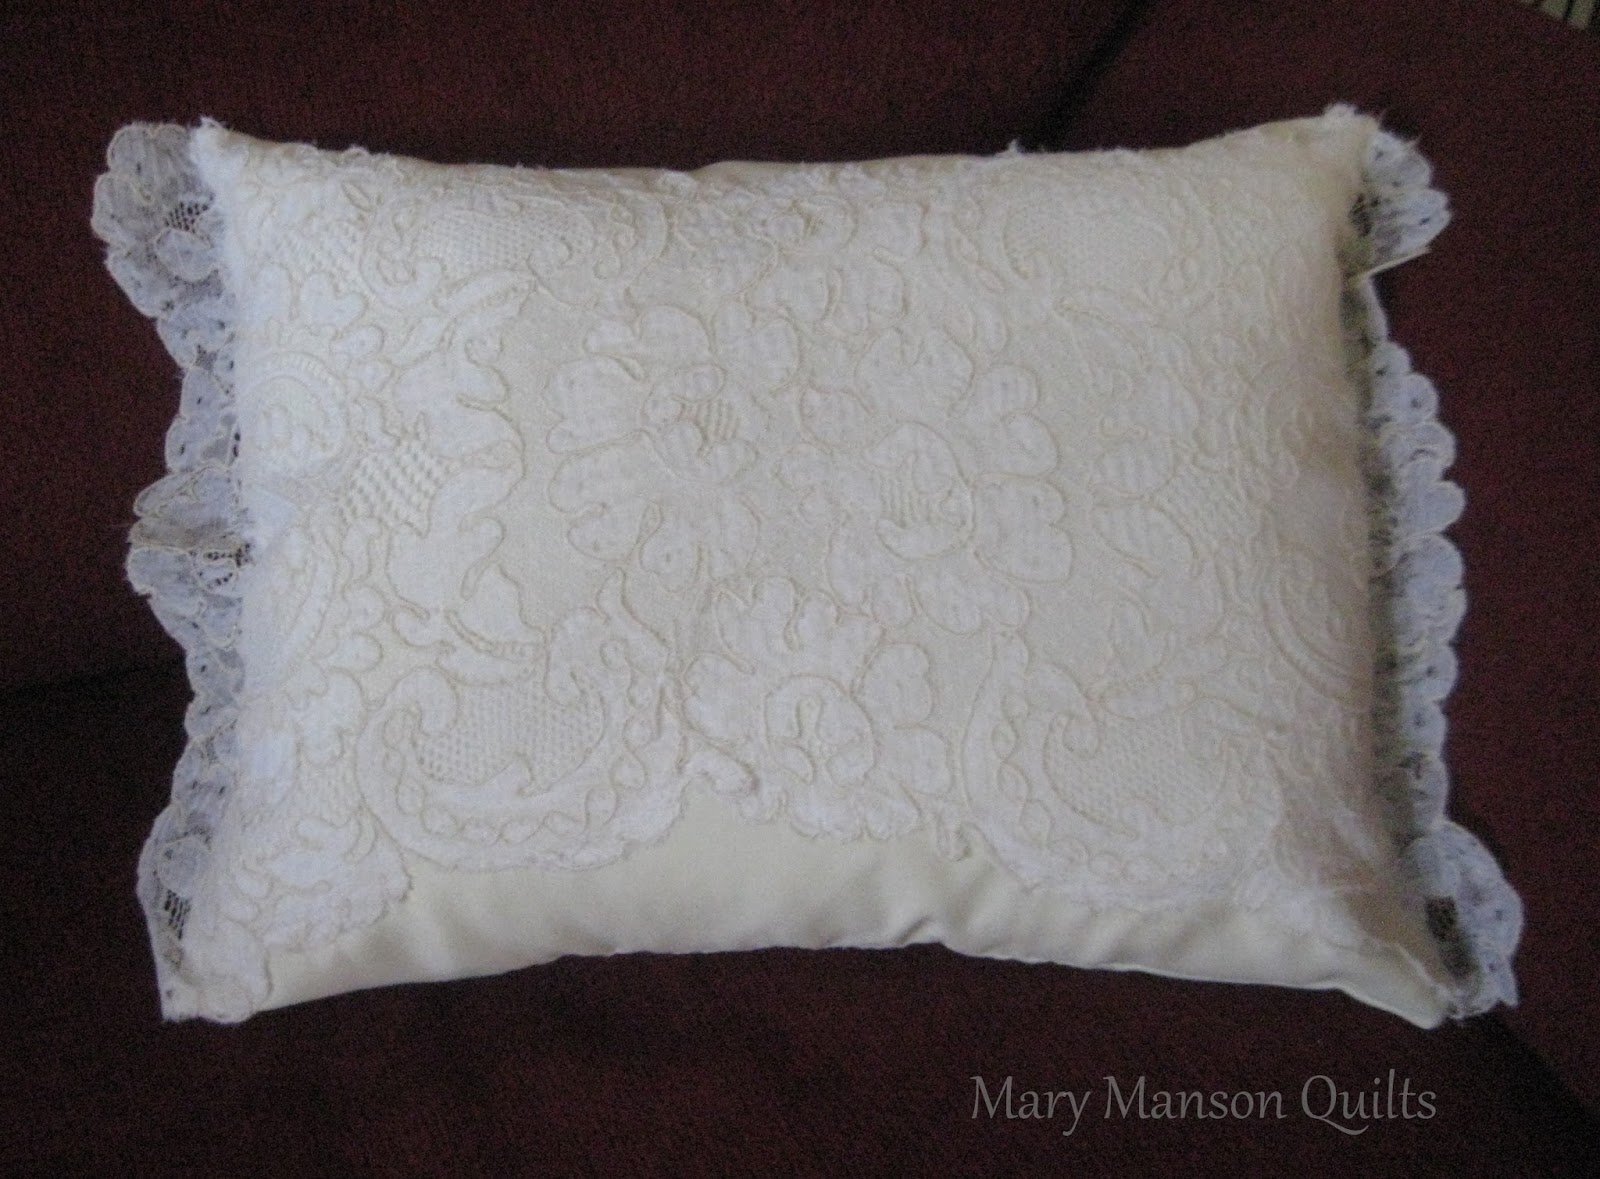 Mary Manson Quilts: Wedding Dress Pillow and Two Quilts in honor of Mothers